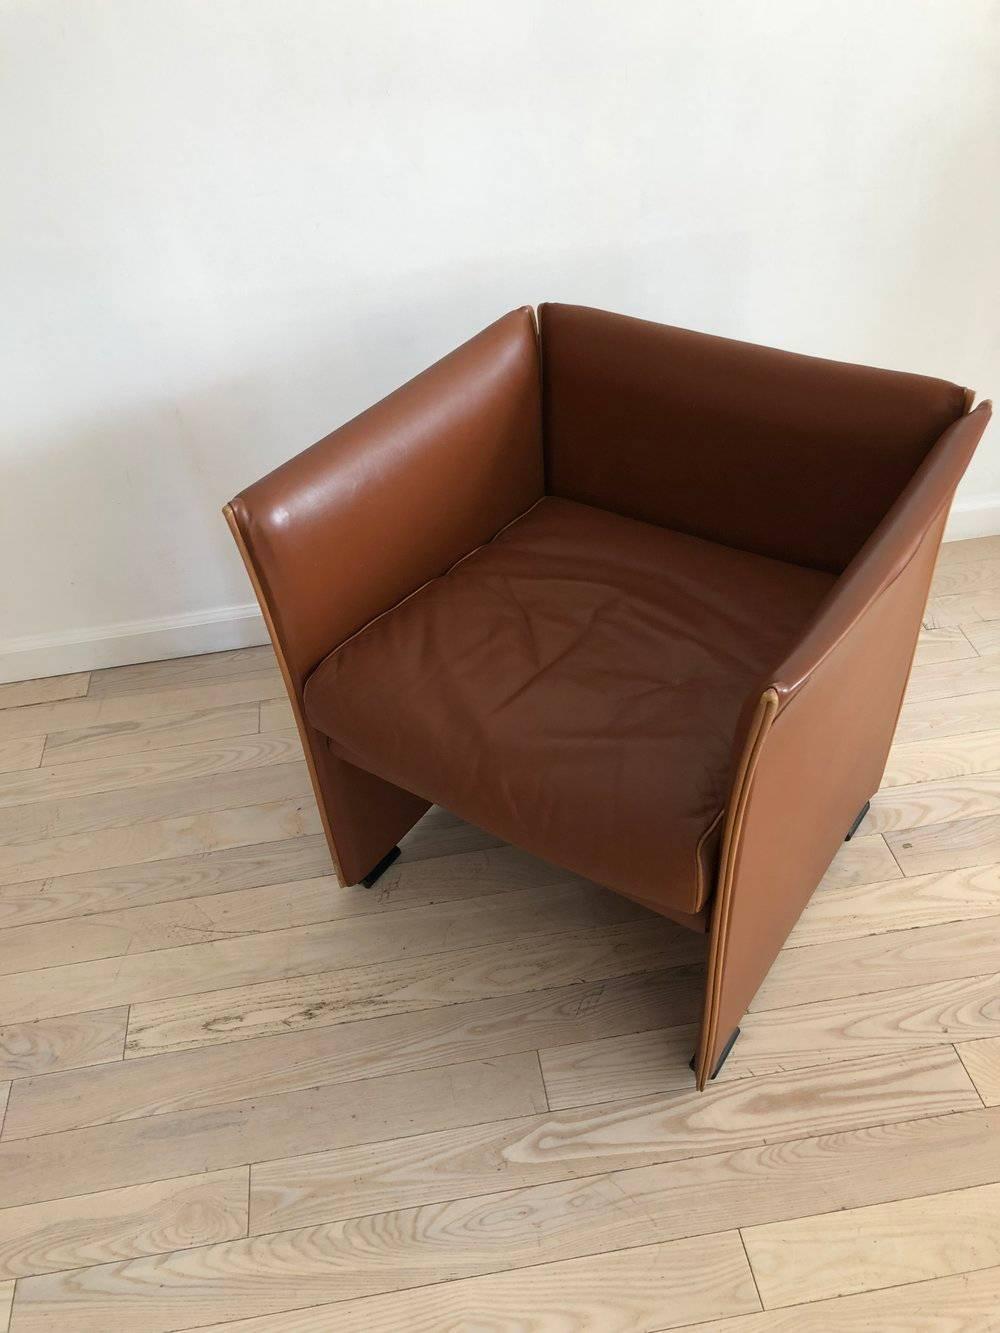 Late 20th Century 1976 401 Break Chair by Mario Bellini for Cassina, Brown Leather